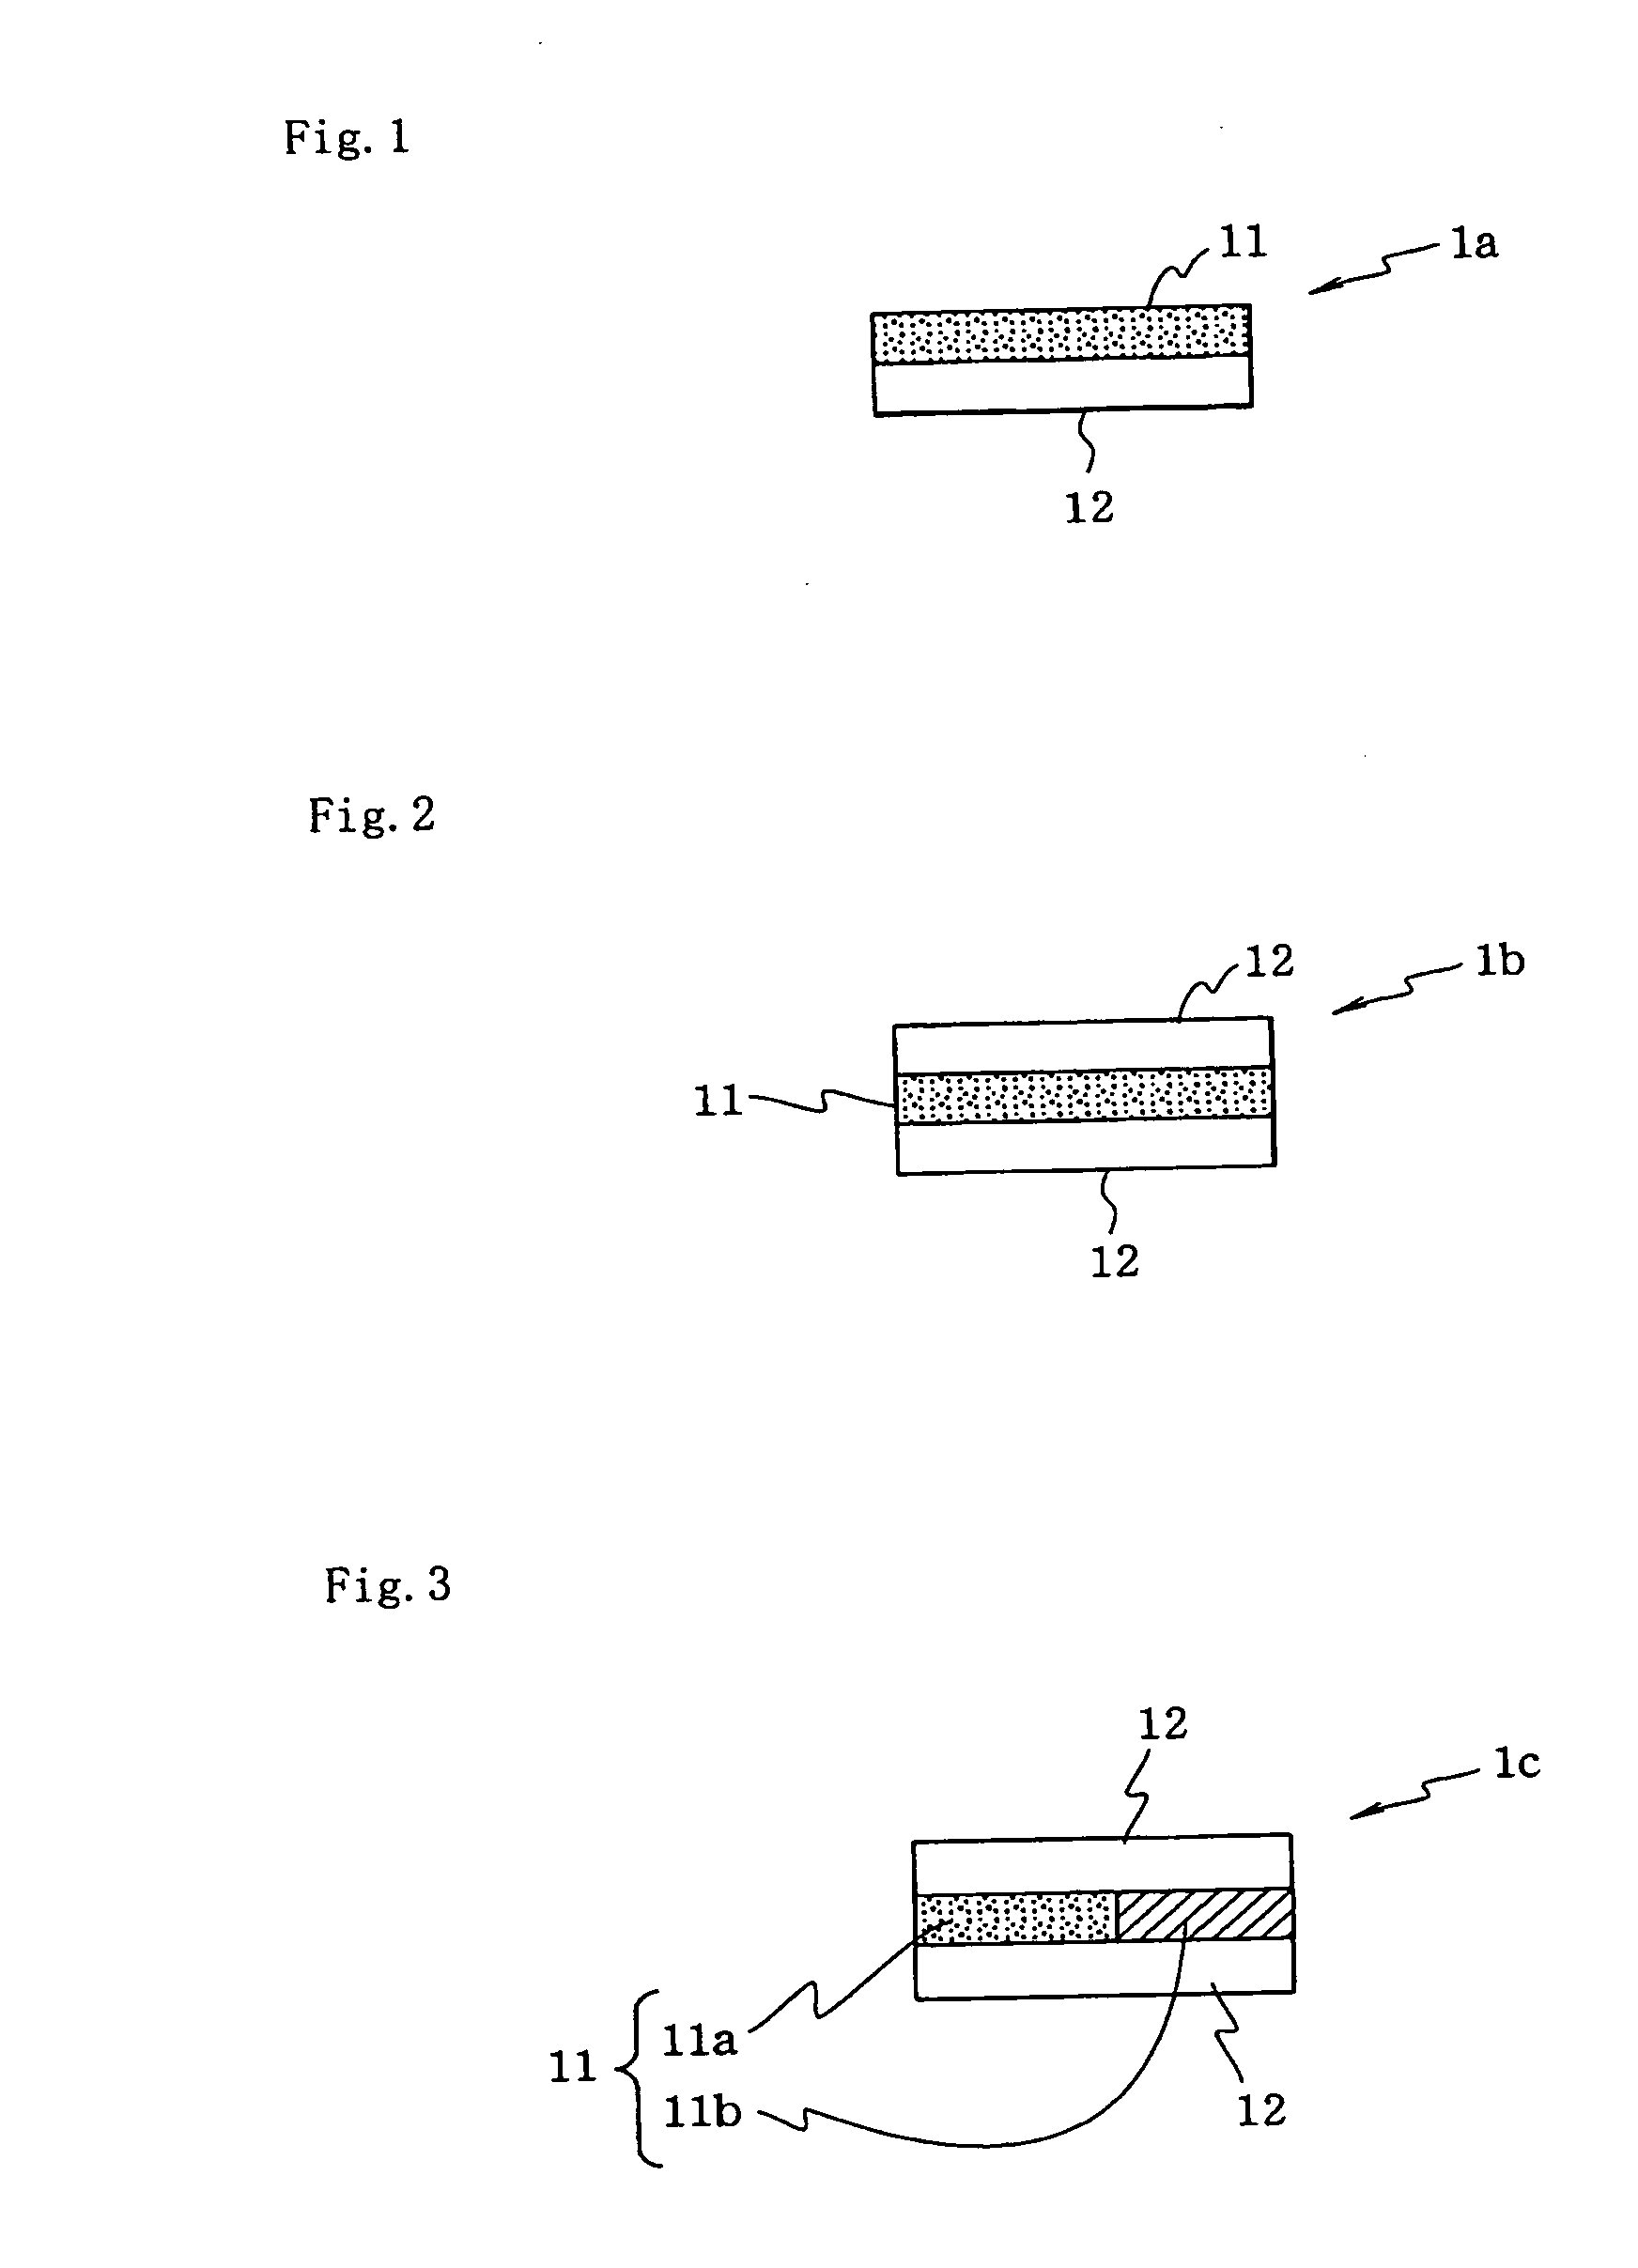 Orally administered agent and an orally administered agent/supporting substrate complex